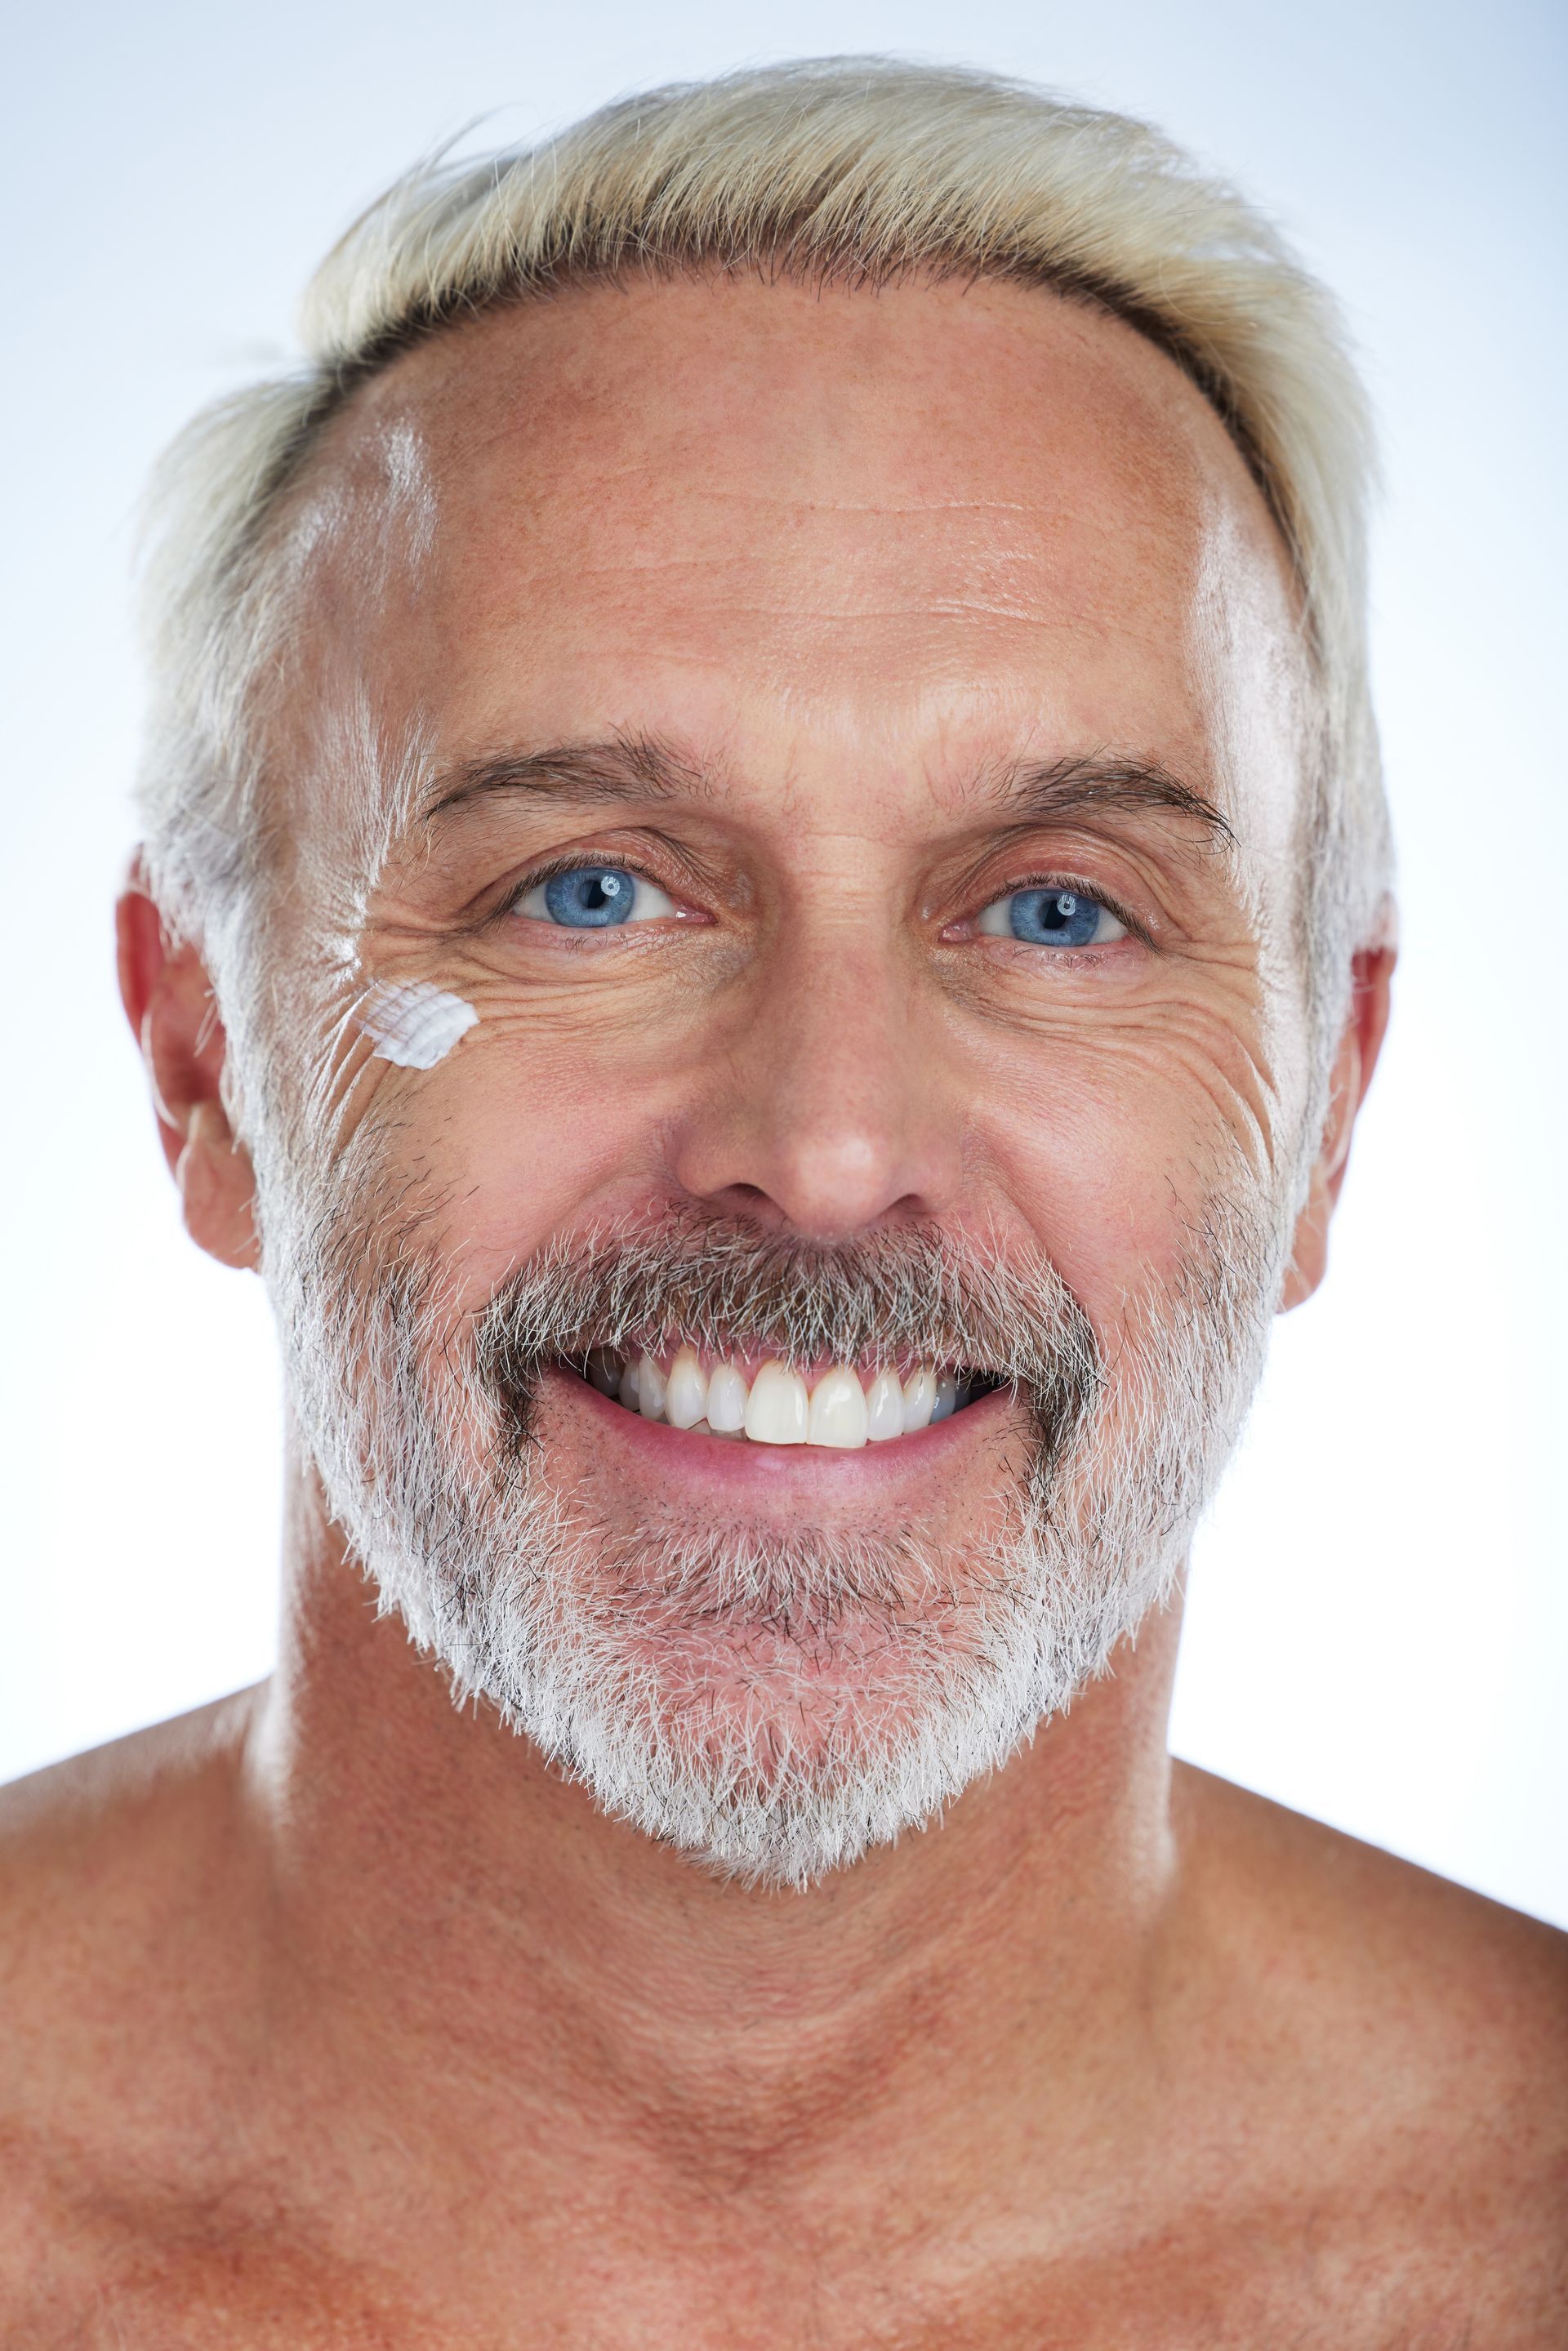 a shirtless man with a beard is smiling and applying lotion to his face .